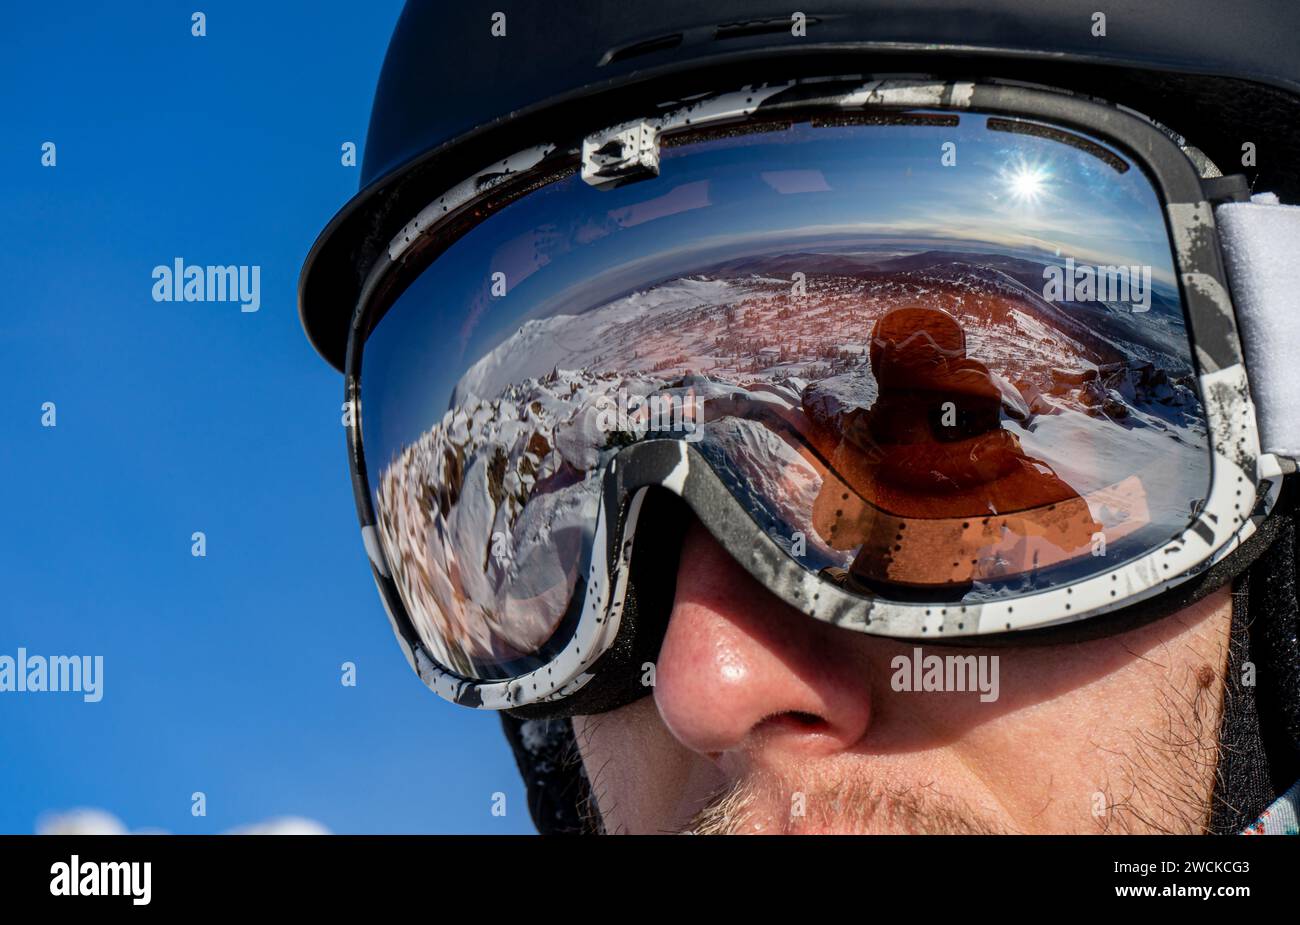 Reflection in ski goggles close-up: snowy mountain slopes for skiing. Skier's or snowboarder equipment: helmet, mask, glasses on man. Weekend active s Stock Photo